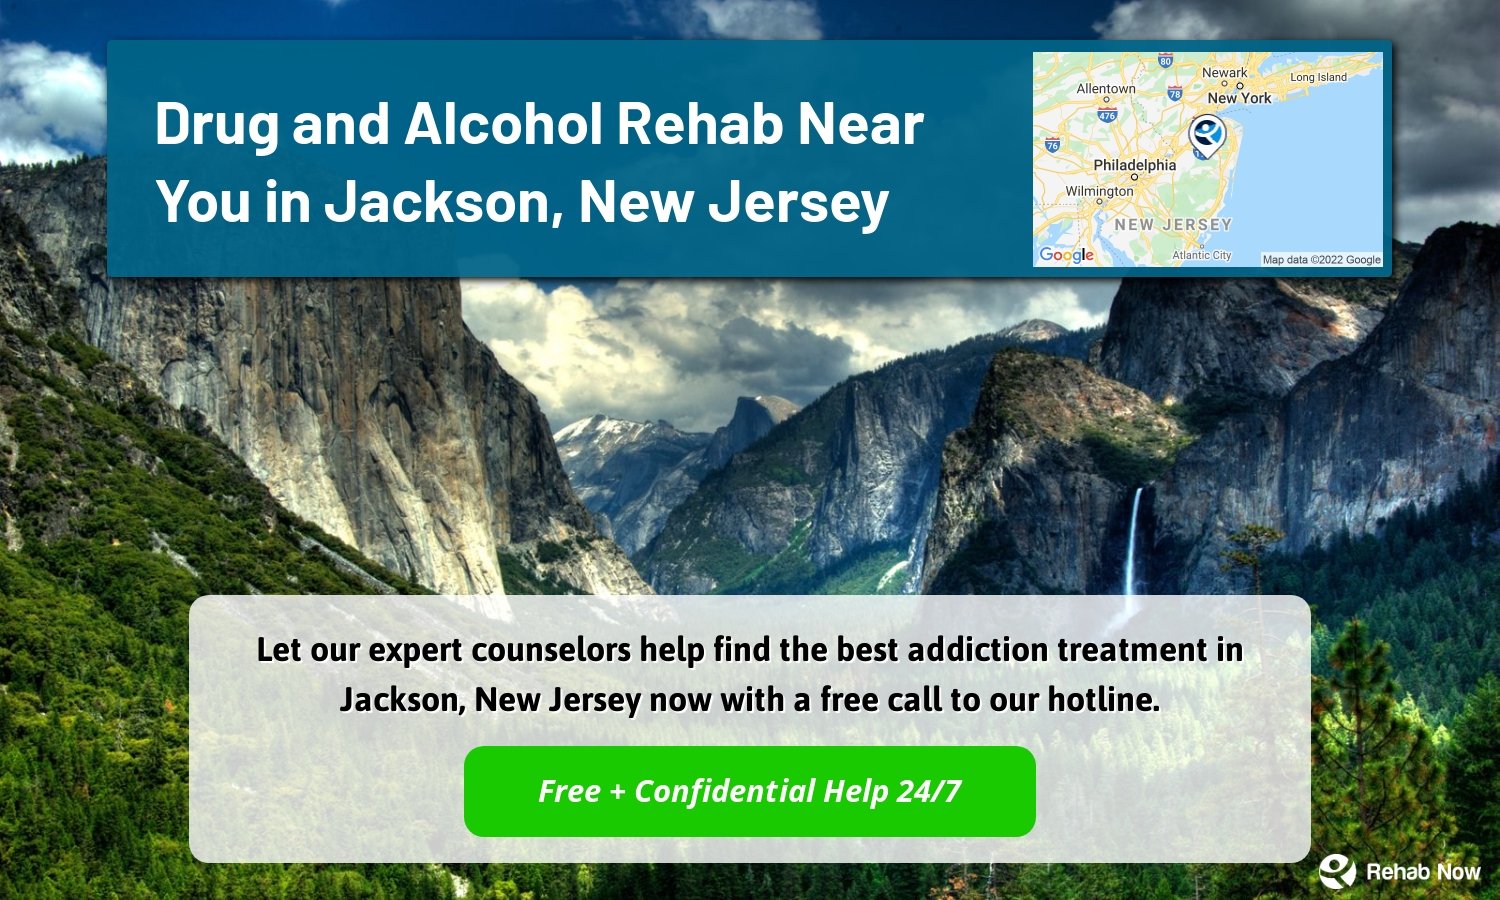 Let our expert counselors help find the best addiction treatment in Jackson, New Jersey now with a free call to our hotline.